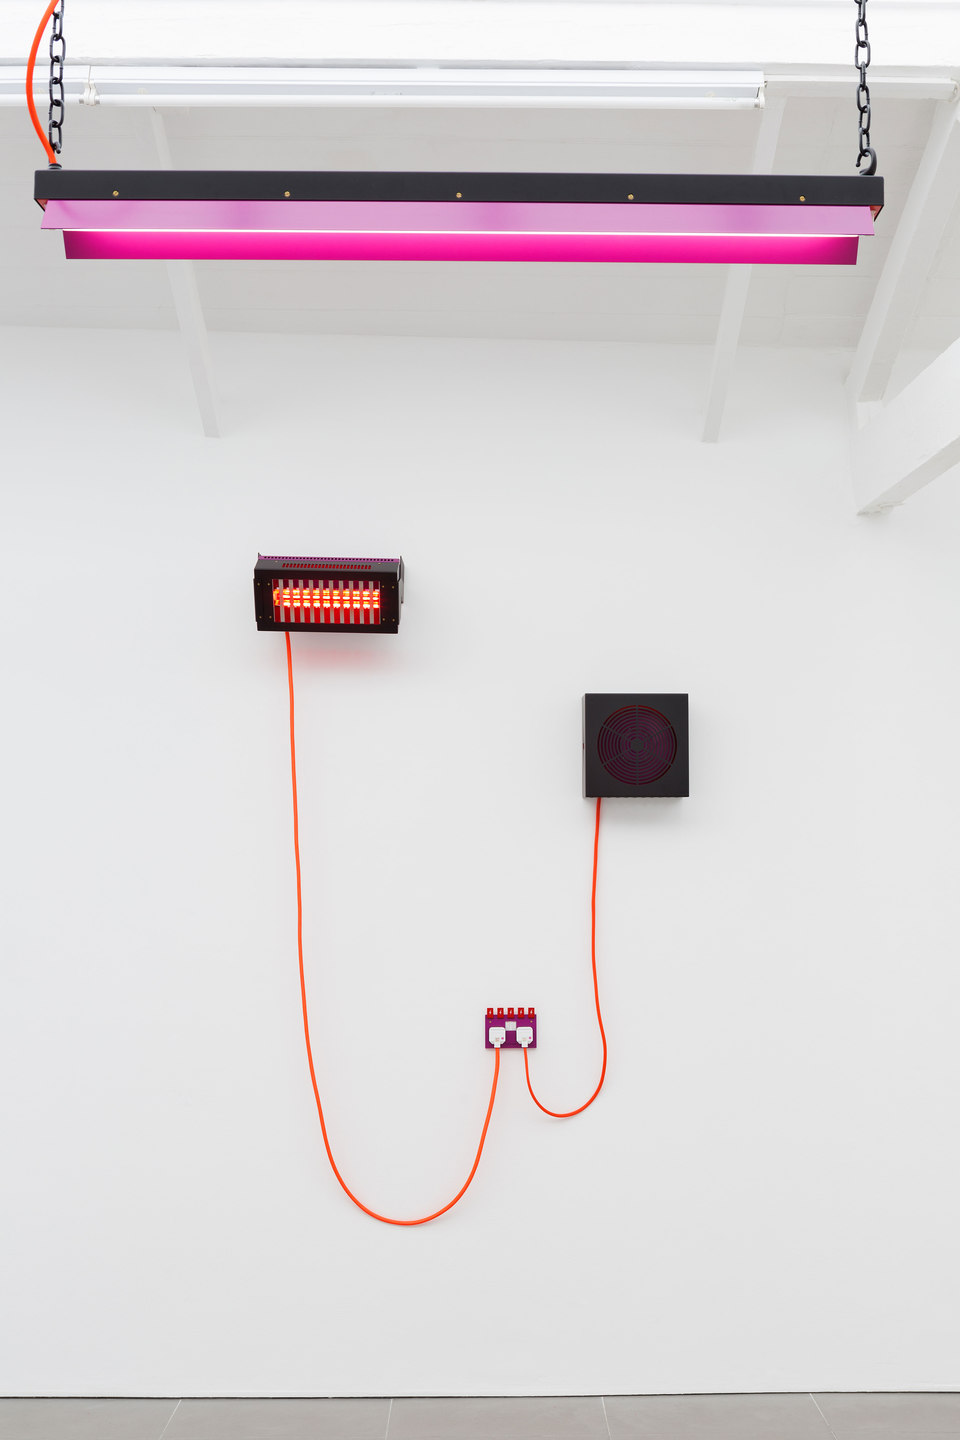 Natalie Dray, DRAY, 2015, installation view, Cell Project Space